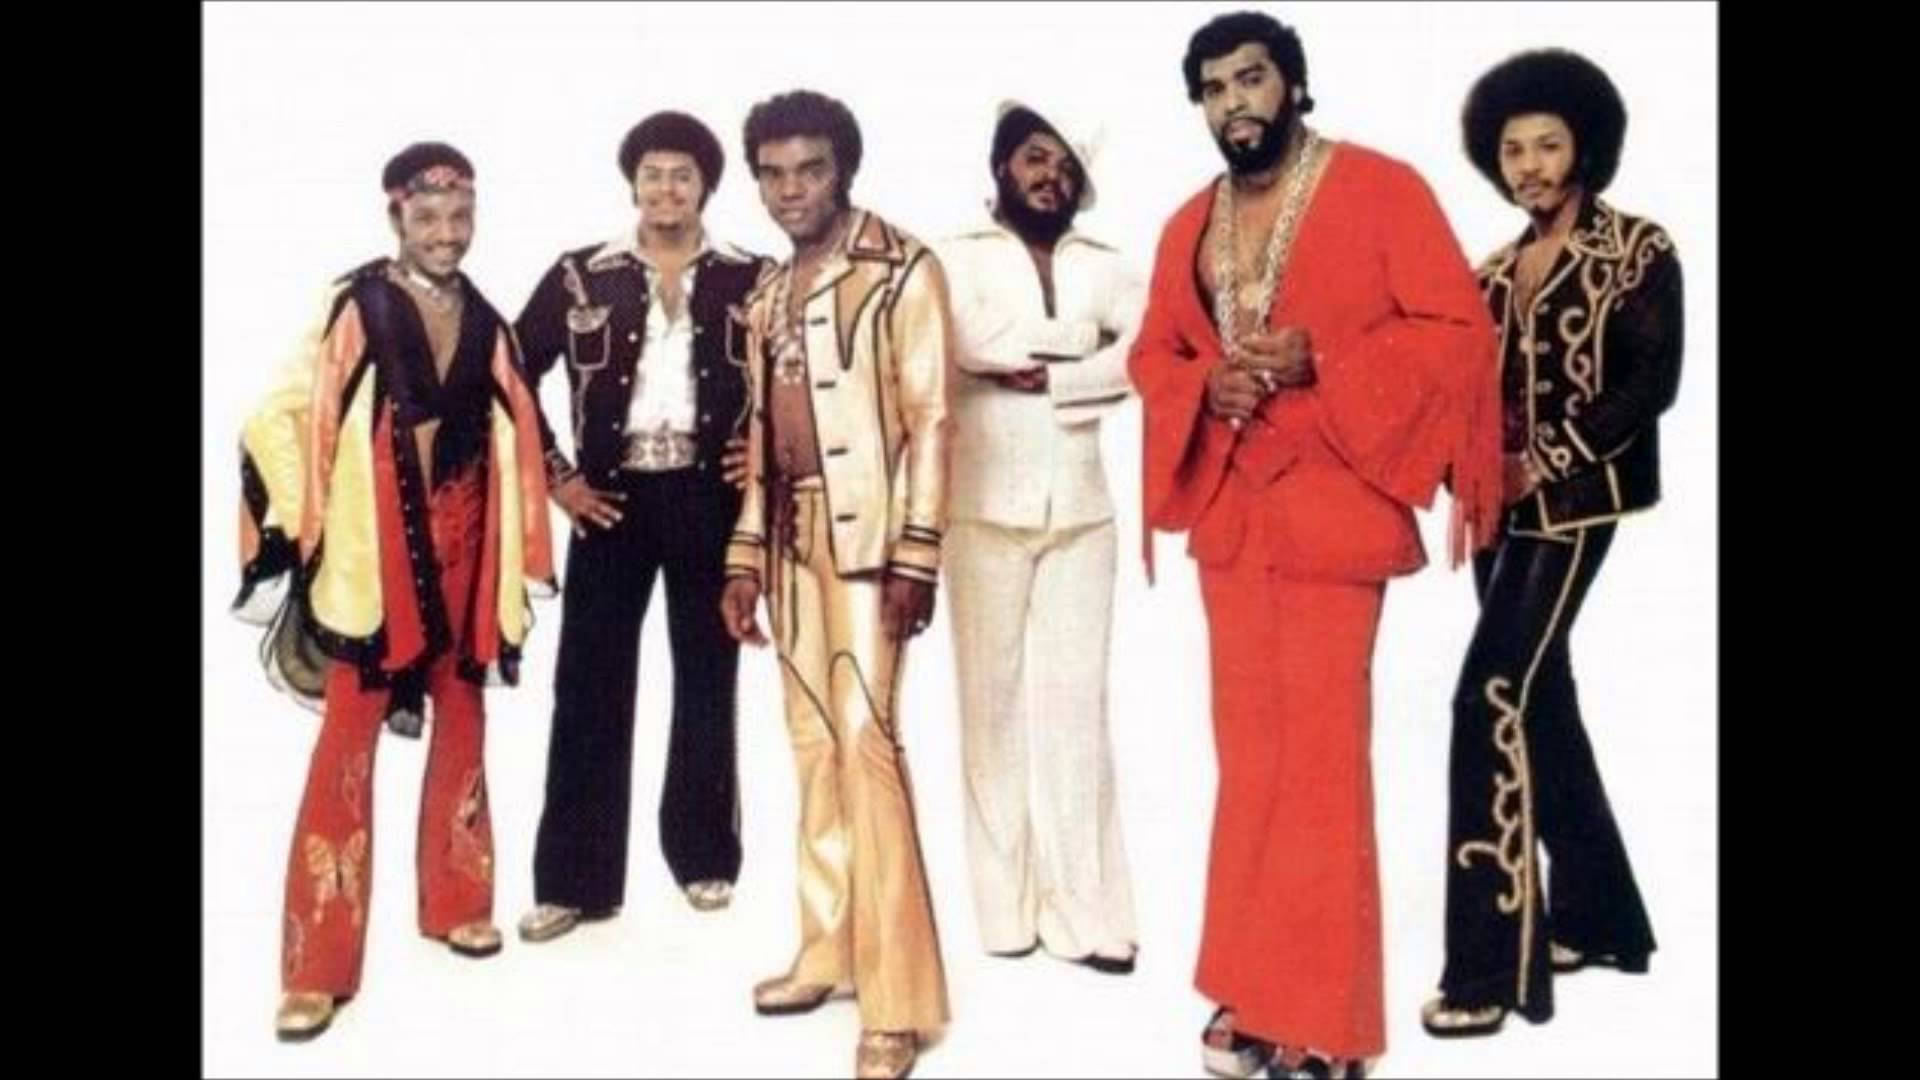 The Isley Brothers Live It Up Album Wallpaper